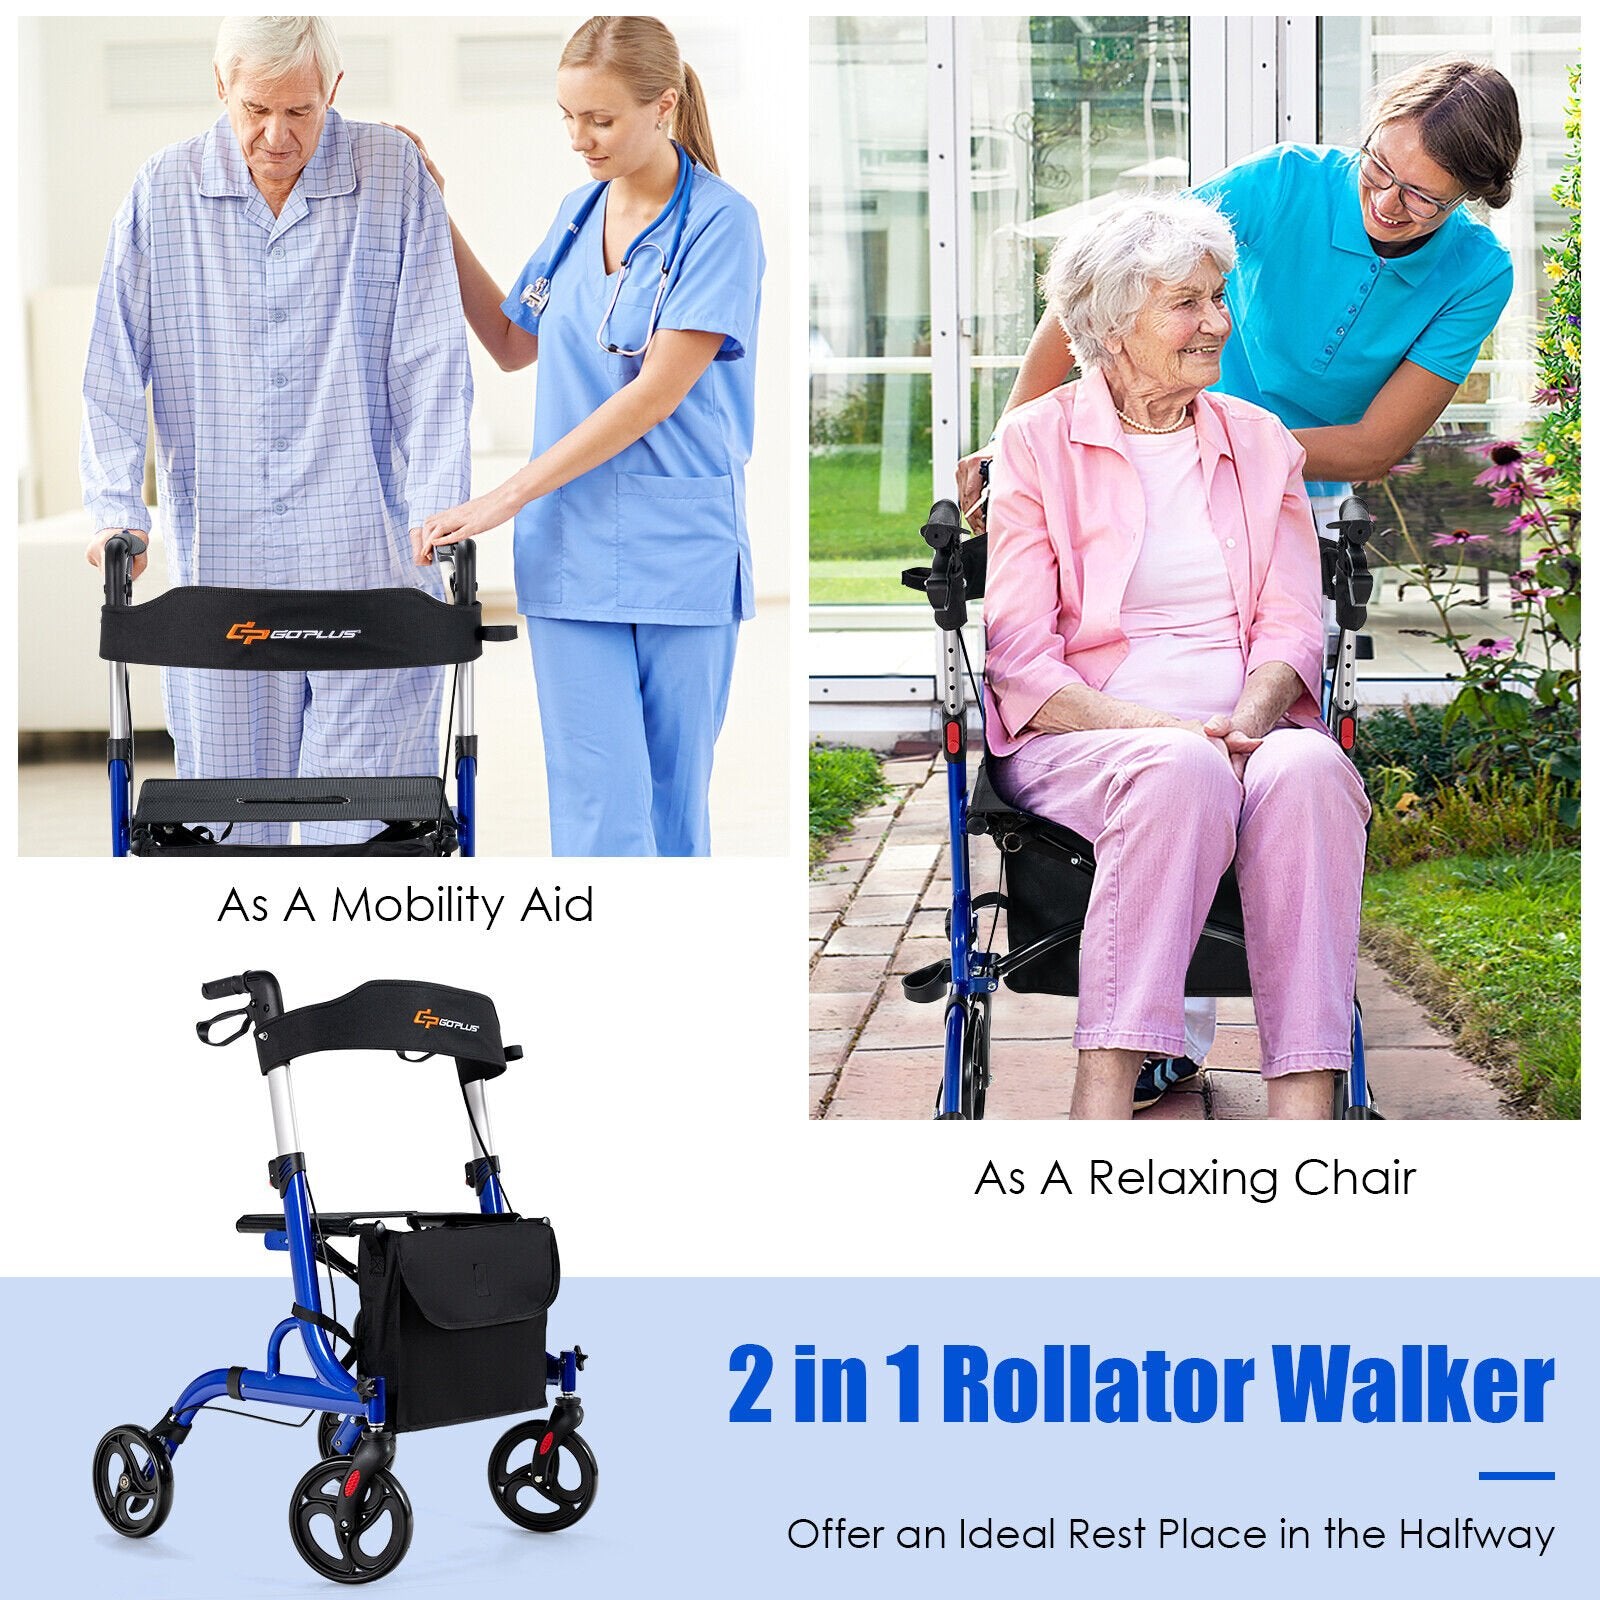 Folding Aluminum Rollator Walker with 8 inch Wheels and Seat, Blue at Gallery Canada